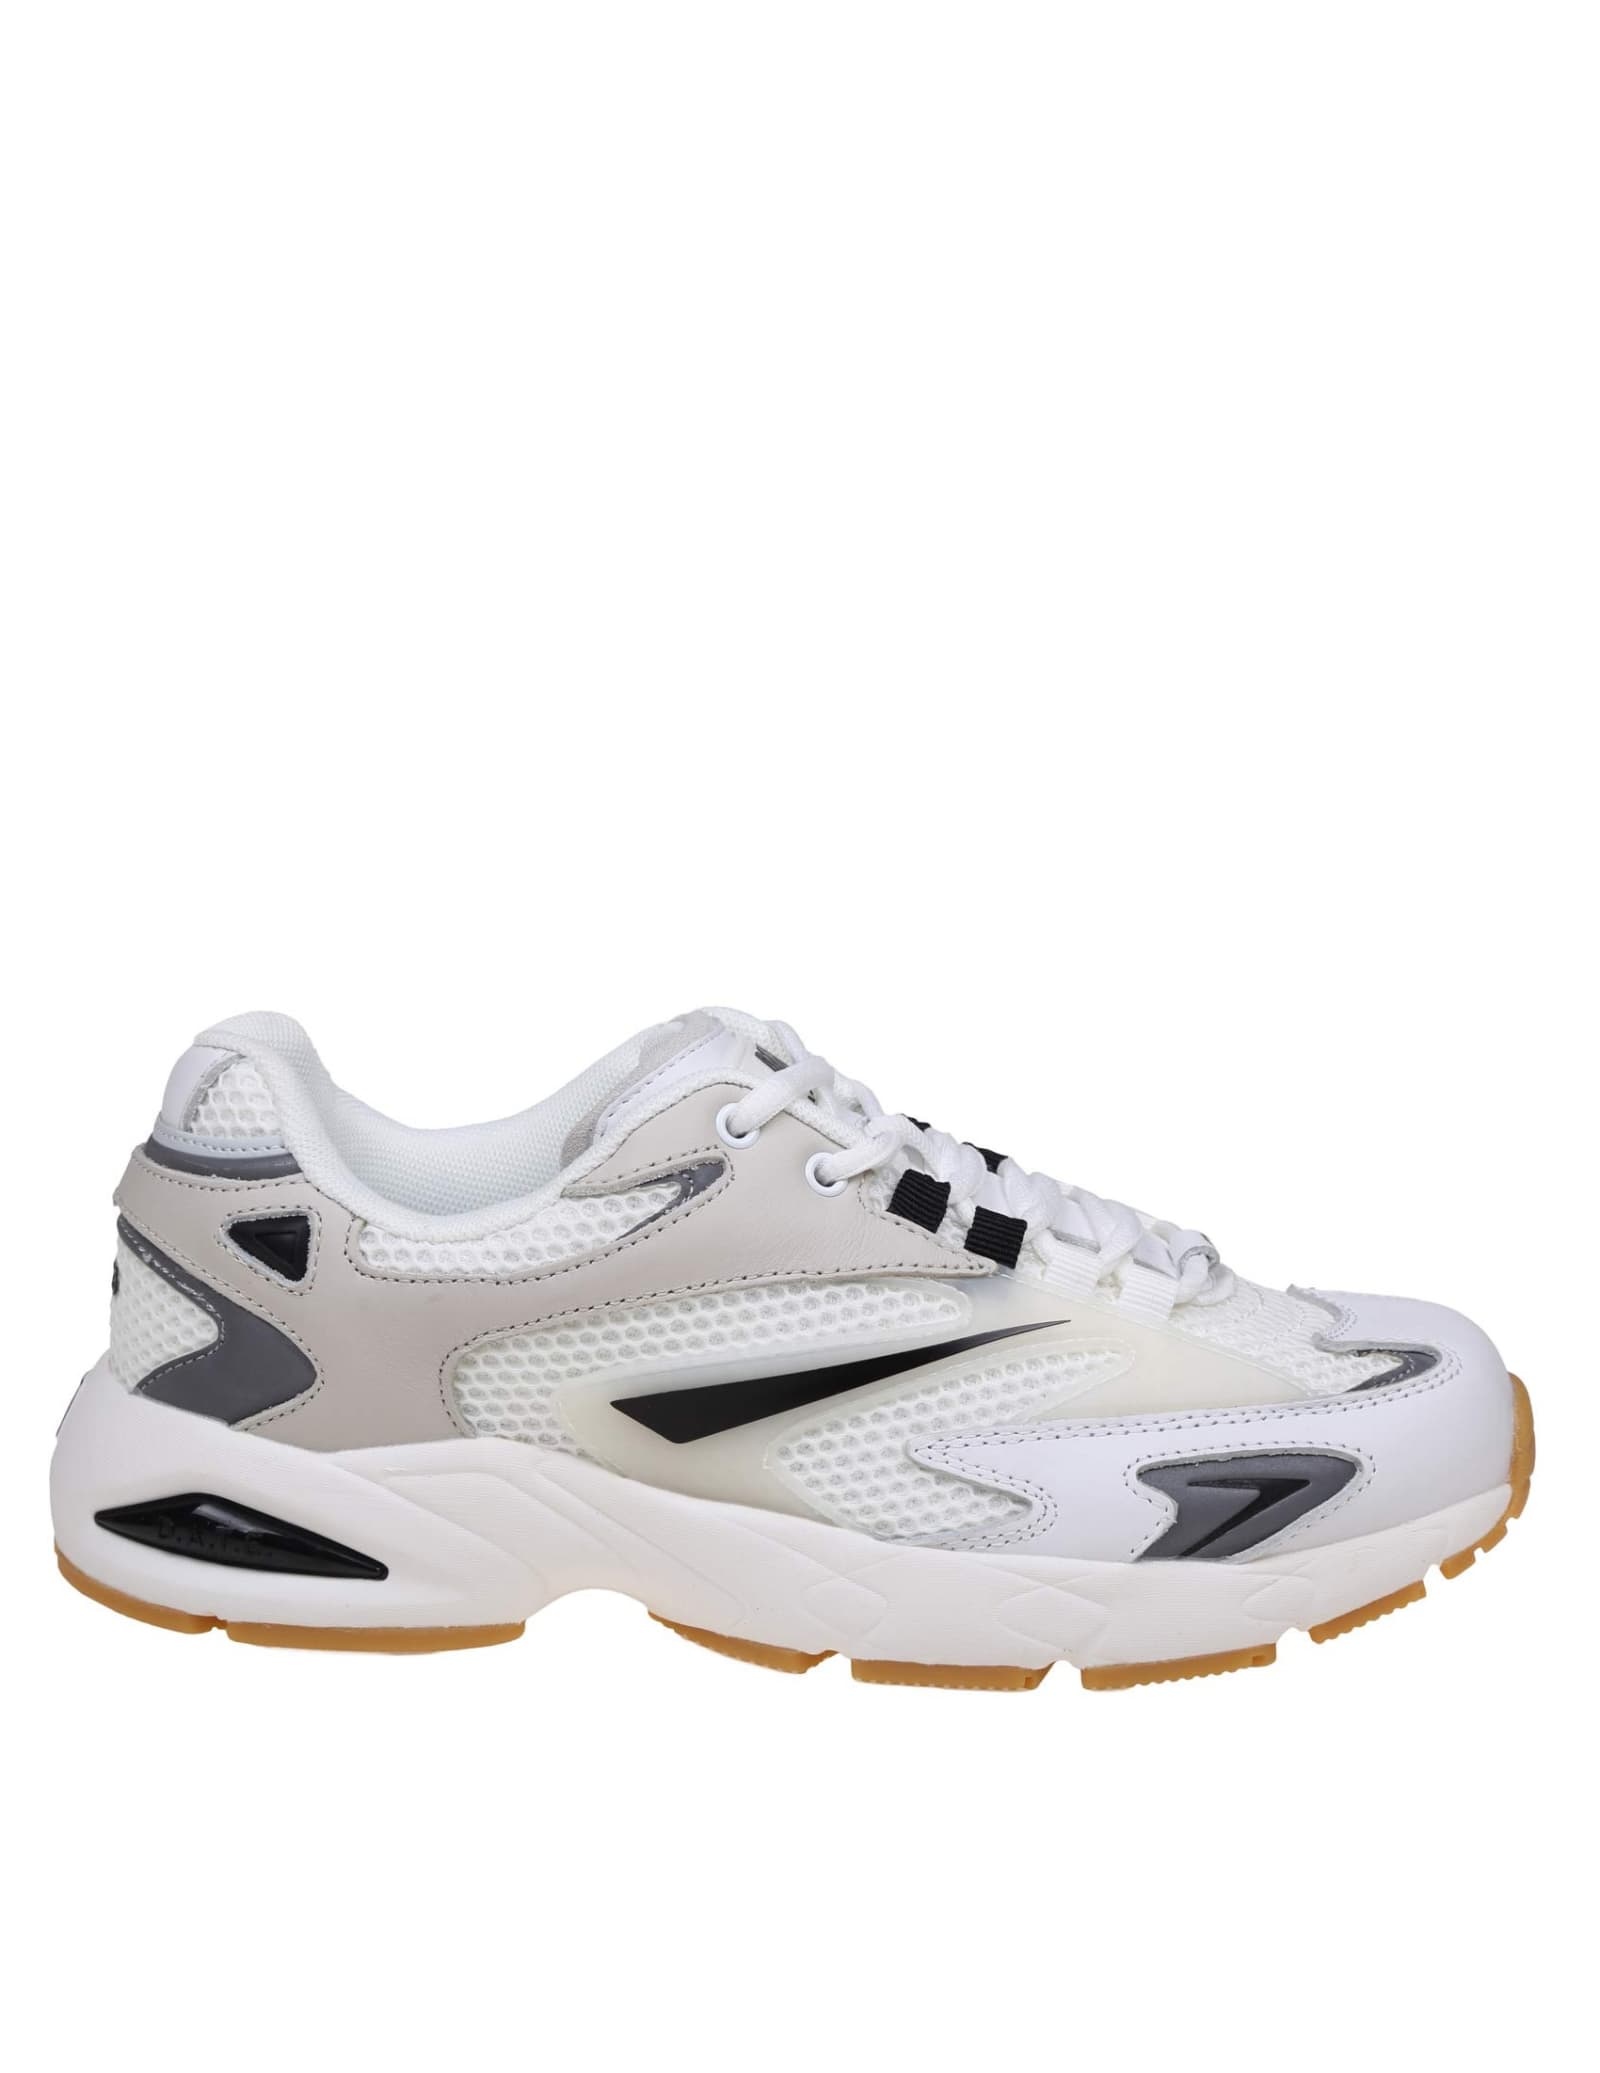 Shop Date Sn23 Sneakers In White/grey Mesh And Leather